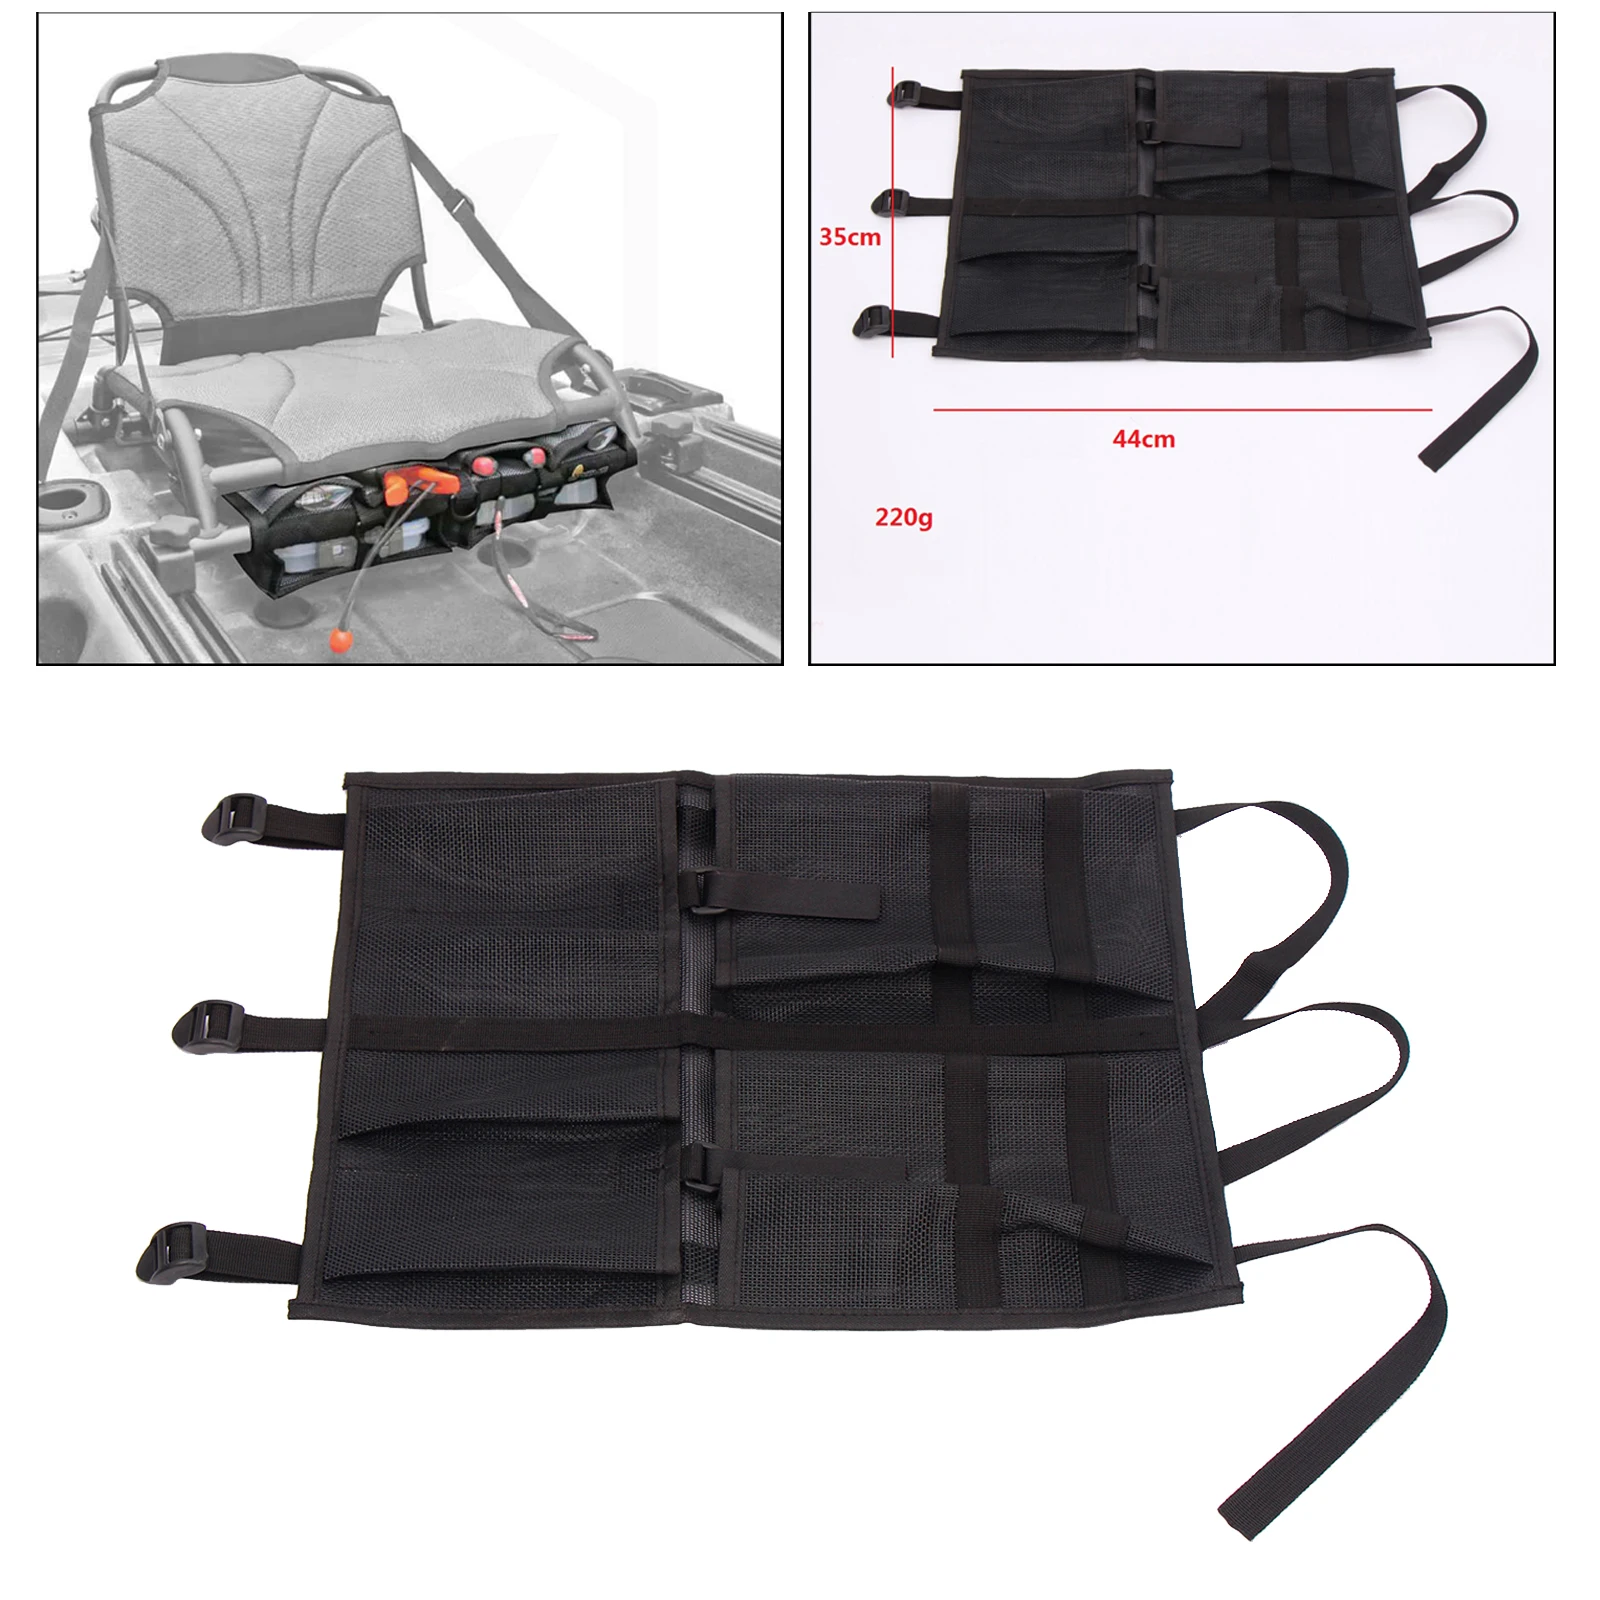 Kayak Mesh Bag Durable Marine Beer 8Storage Bag for Hold Pouch Accessories